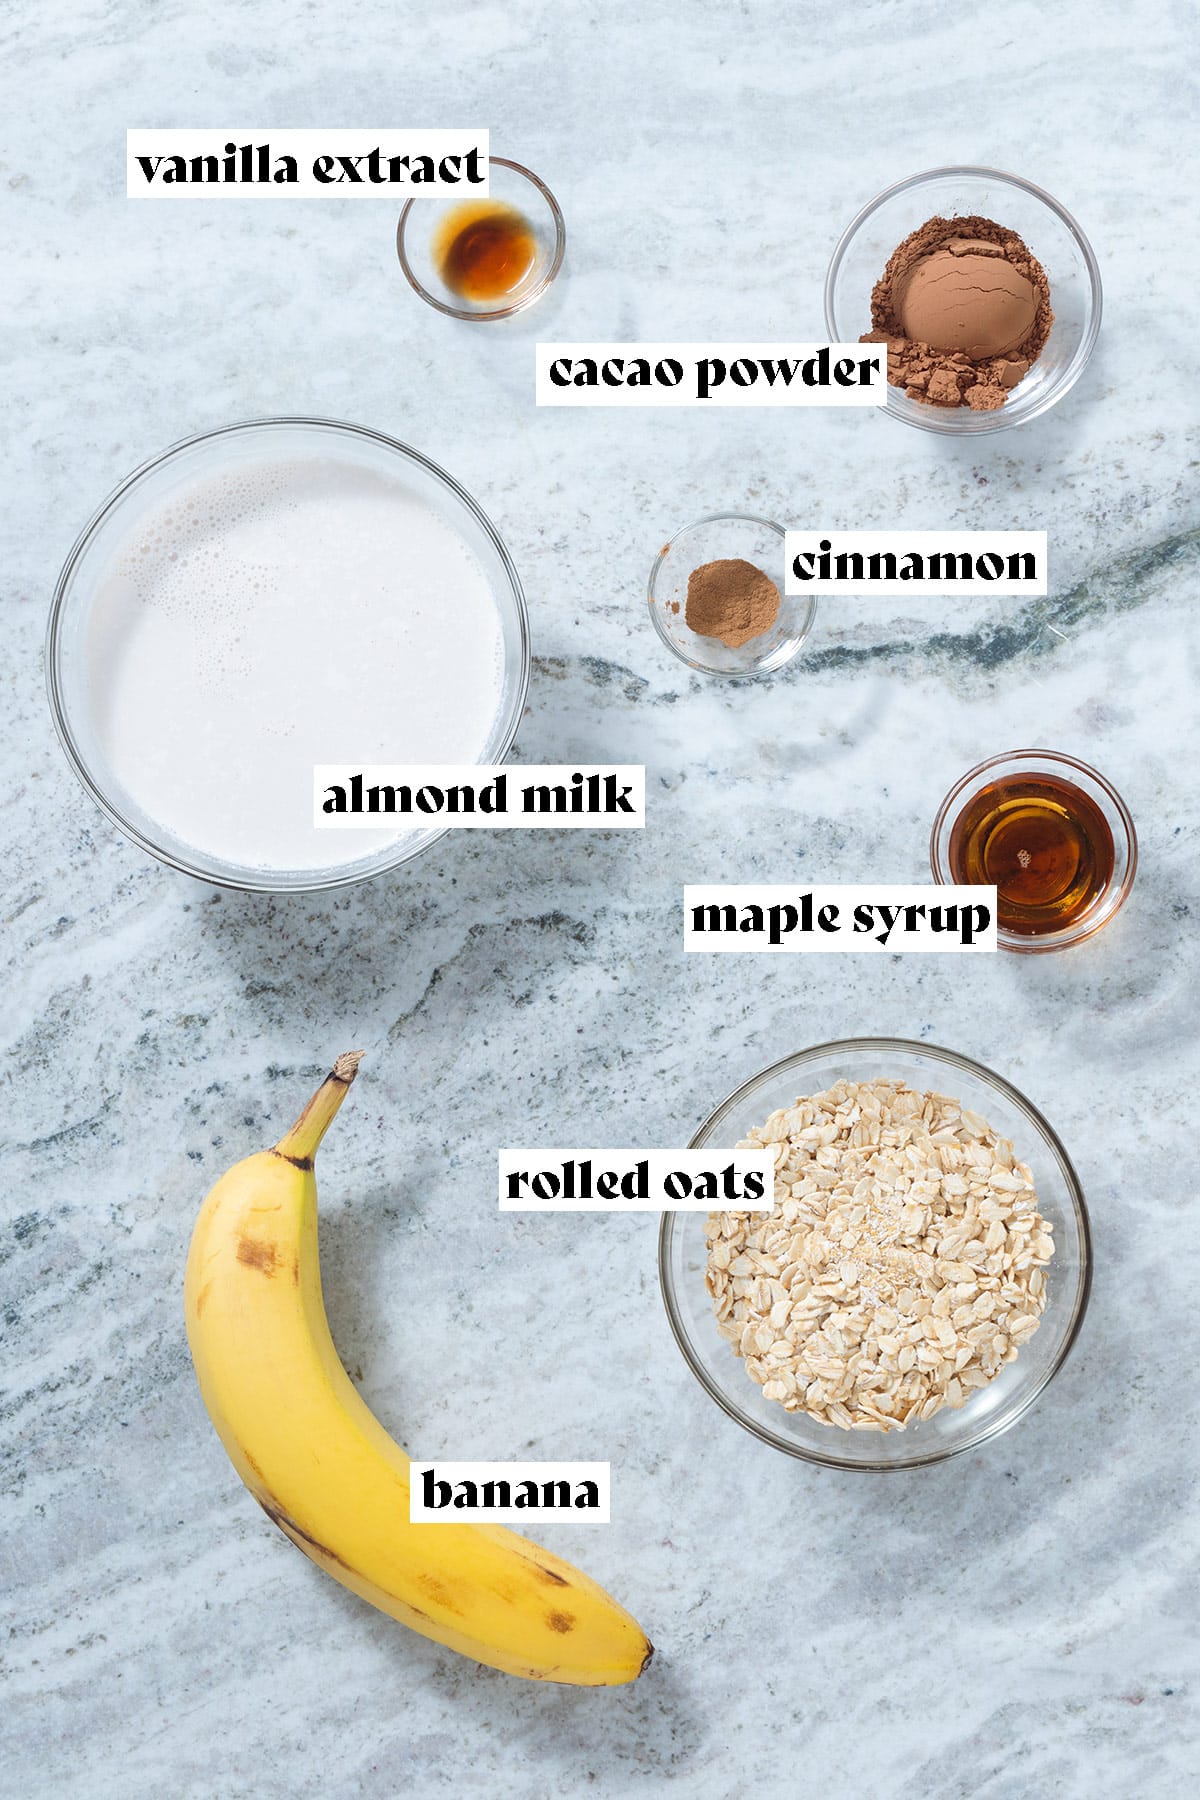 Rolled oats, almond milk, banana, and other ingredients laid out on a grey stone background.